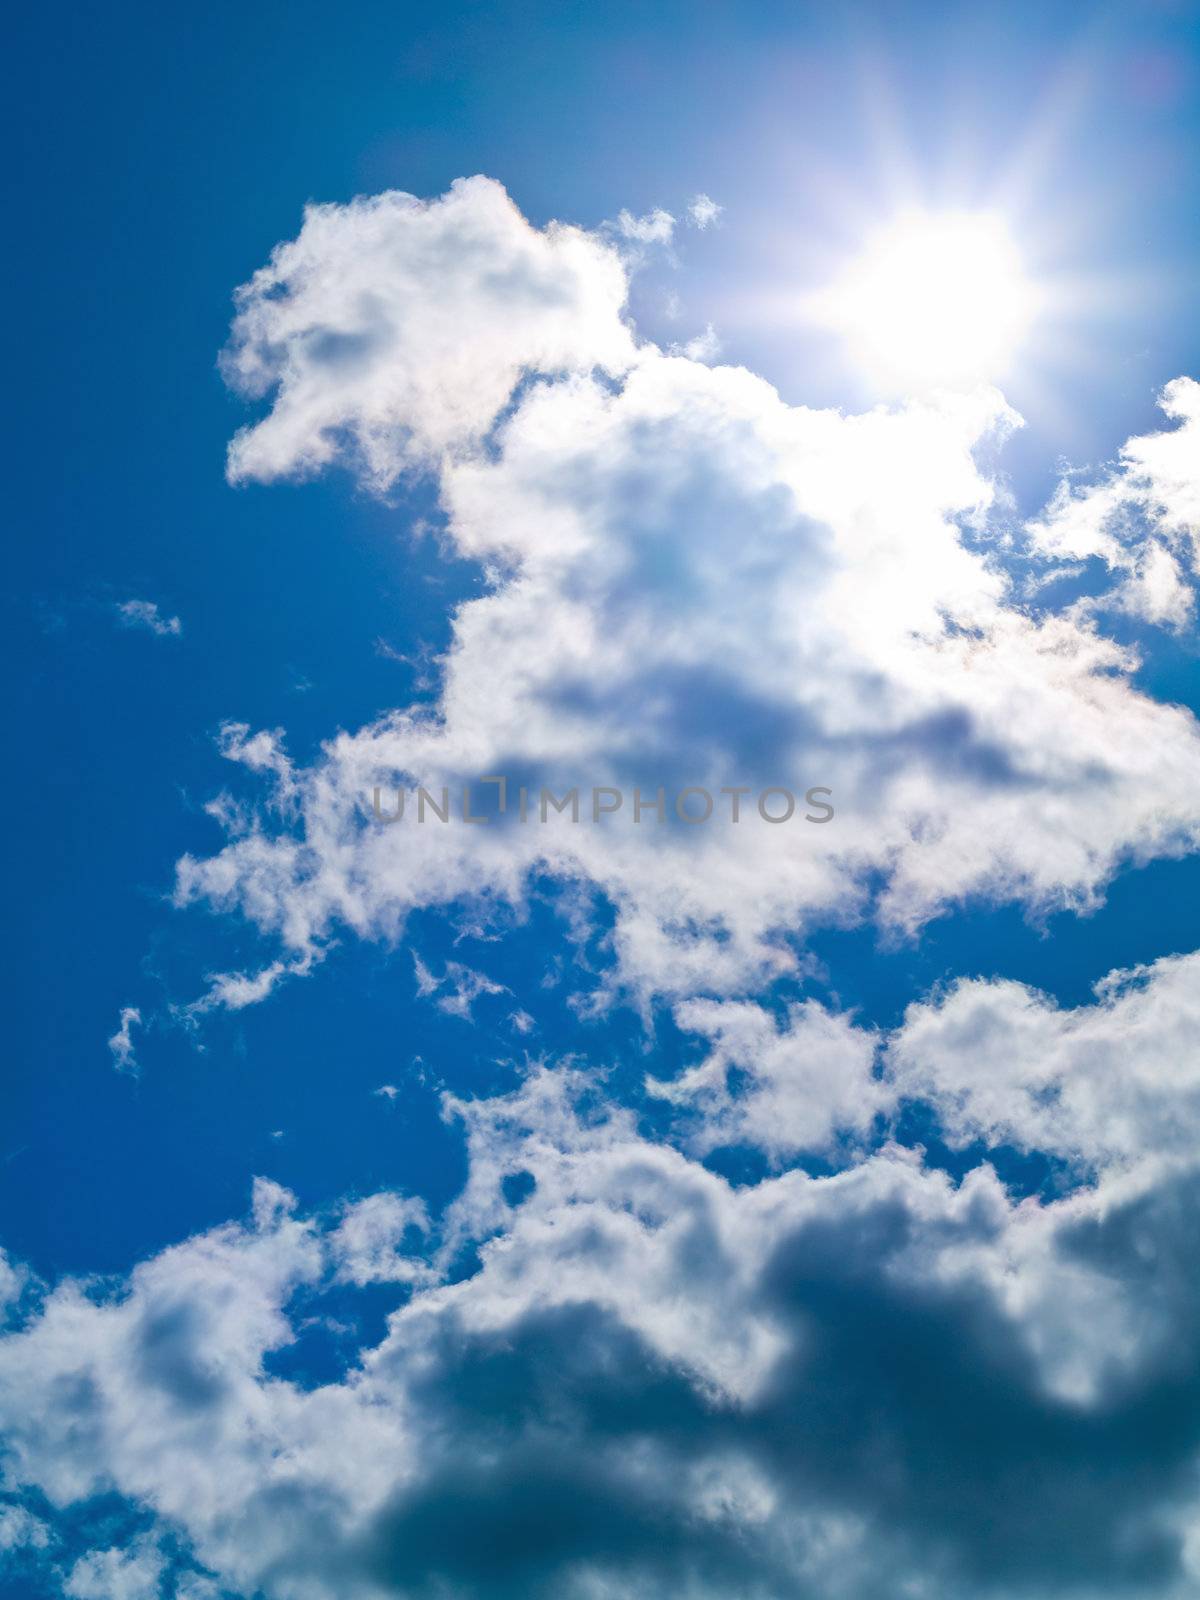 Sun in the sky with white clouds